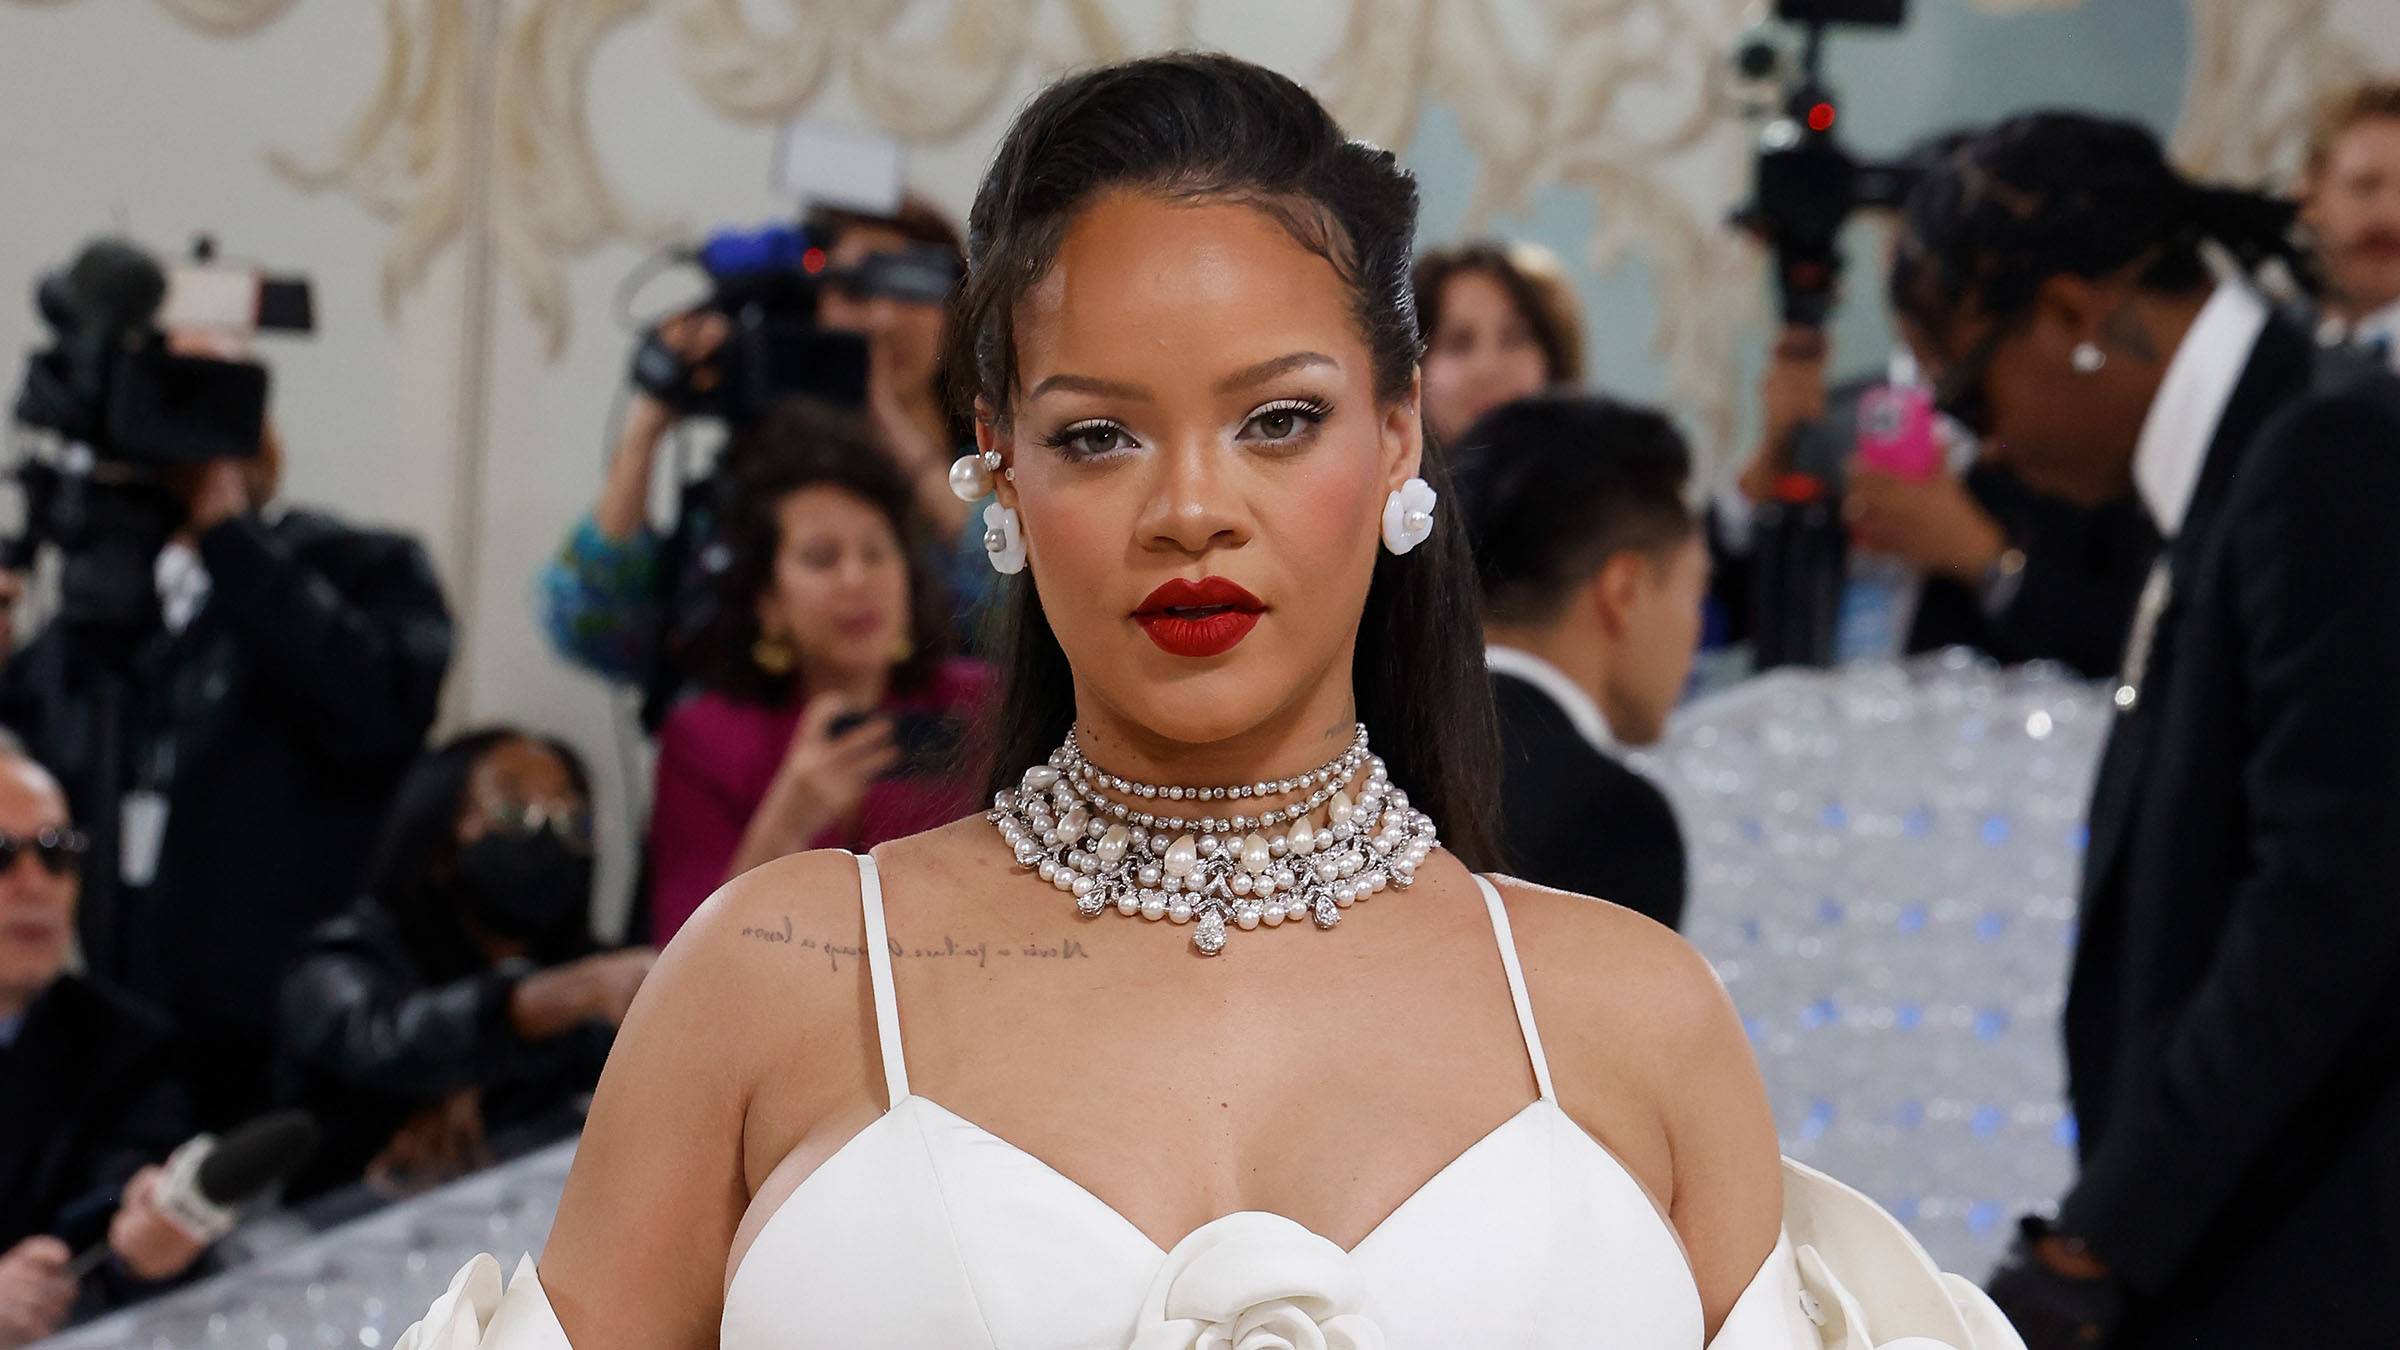 Rihanna Glows While Posing in Red Lingerie for Savage X Fenty